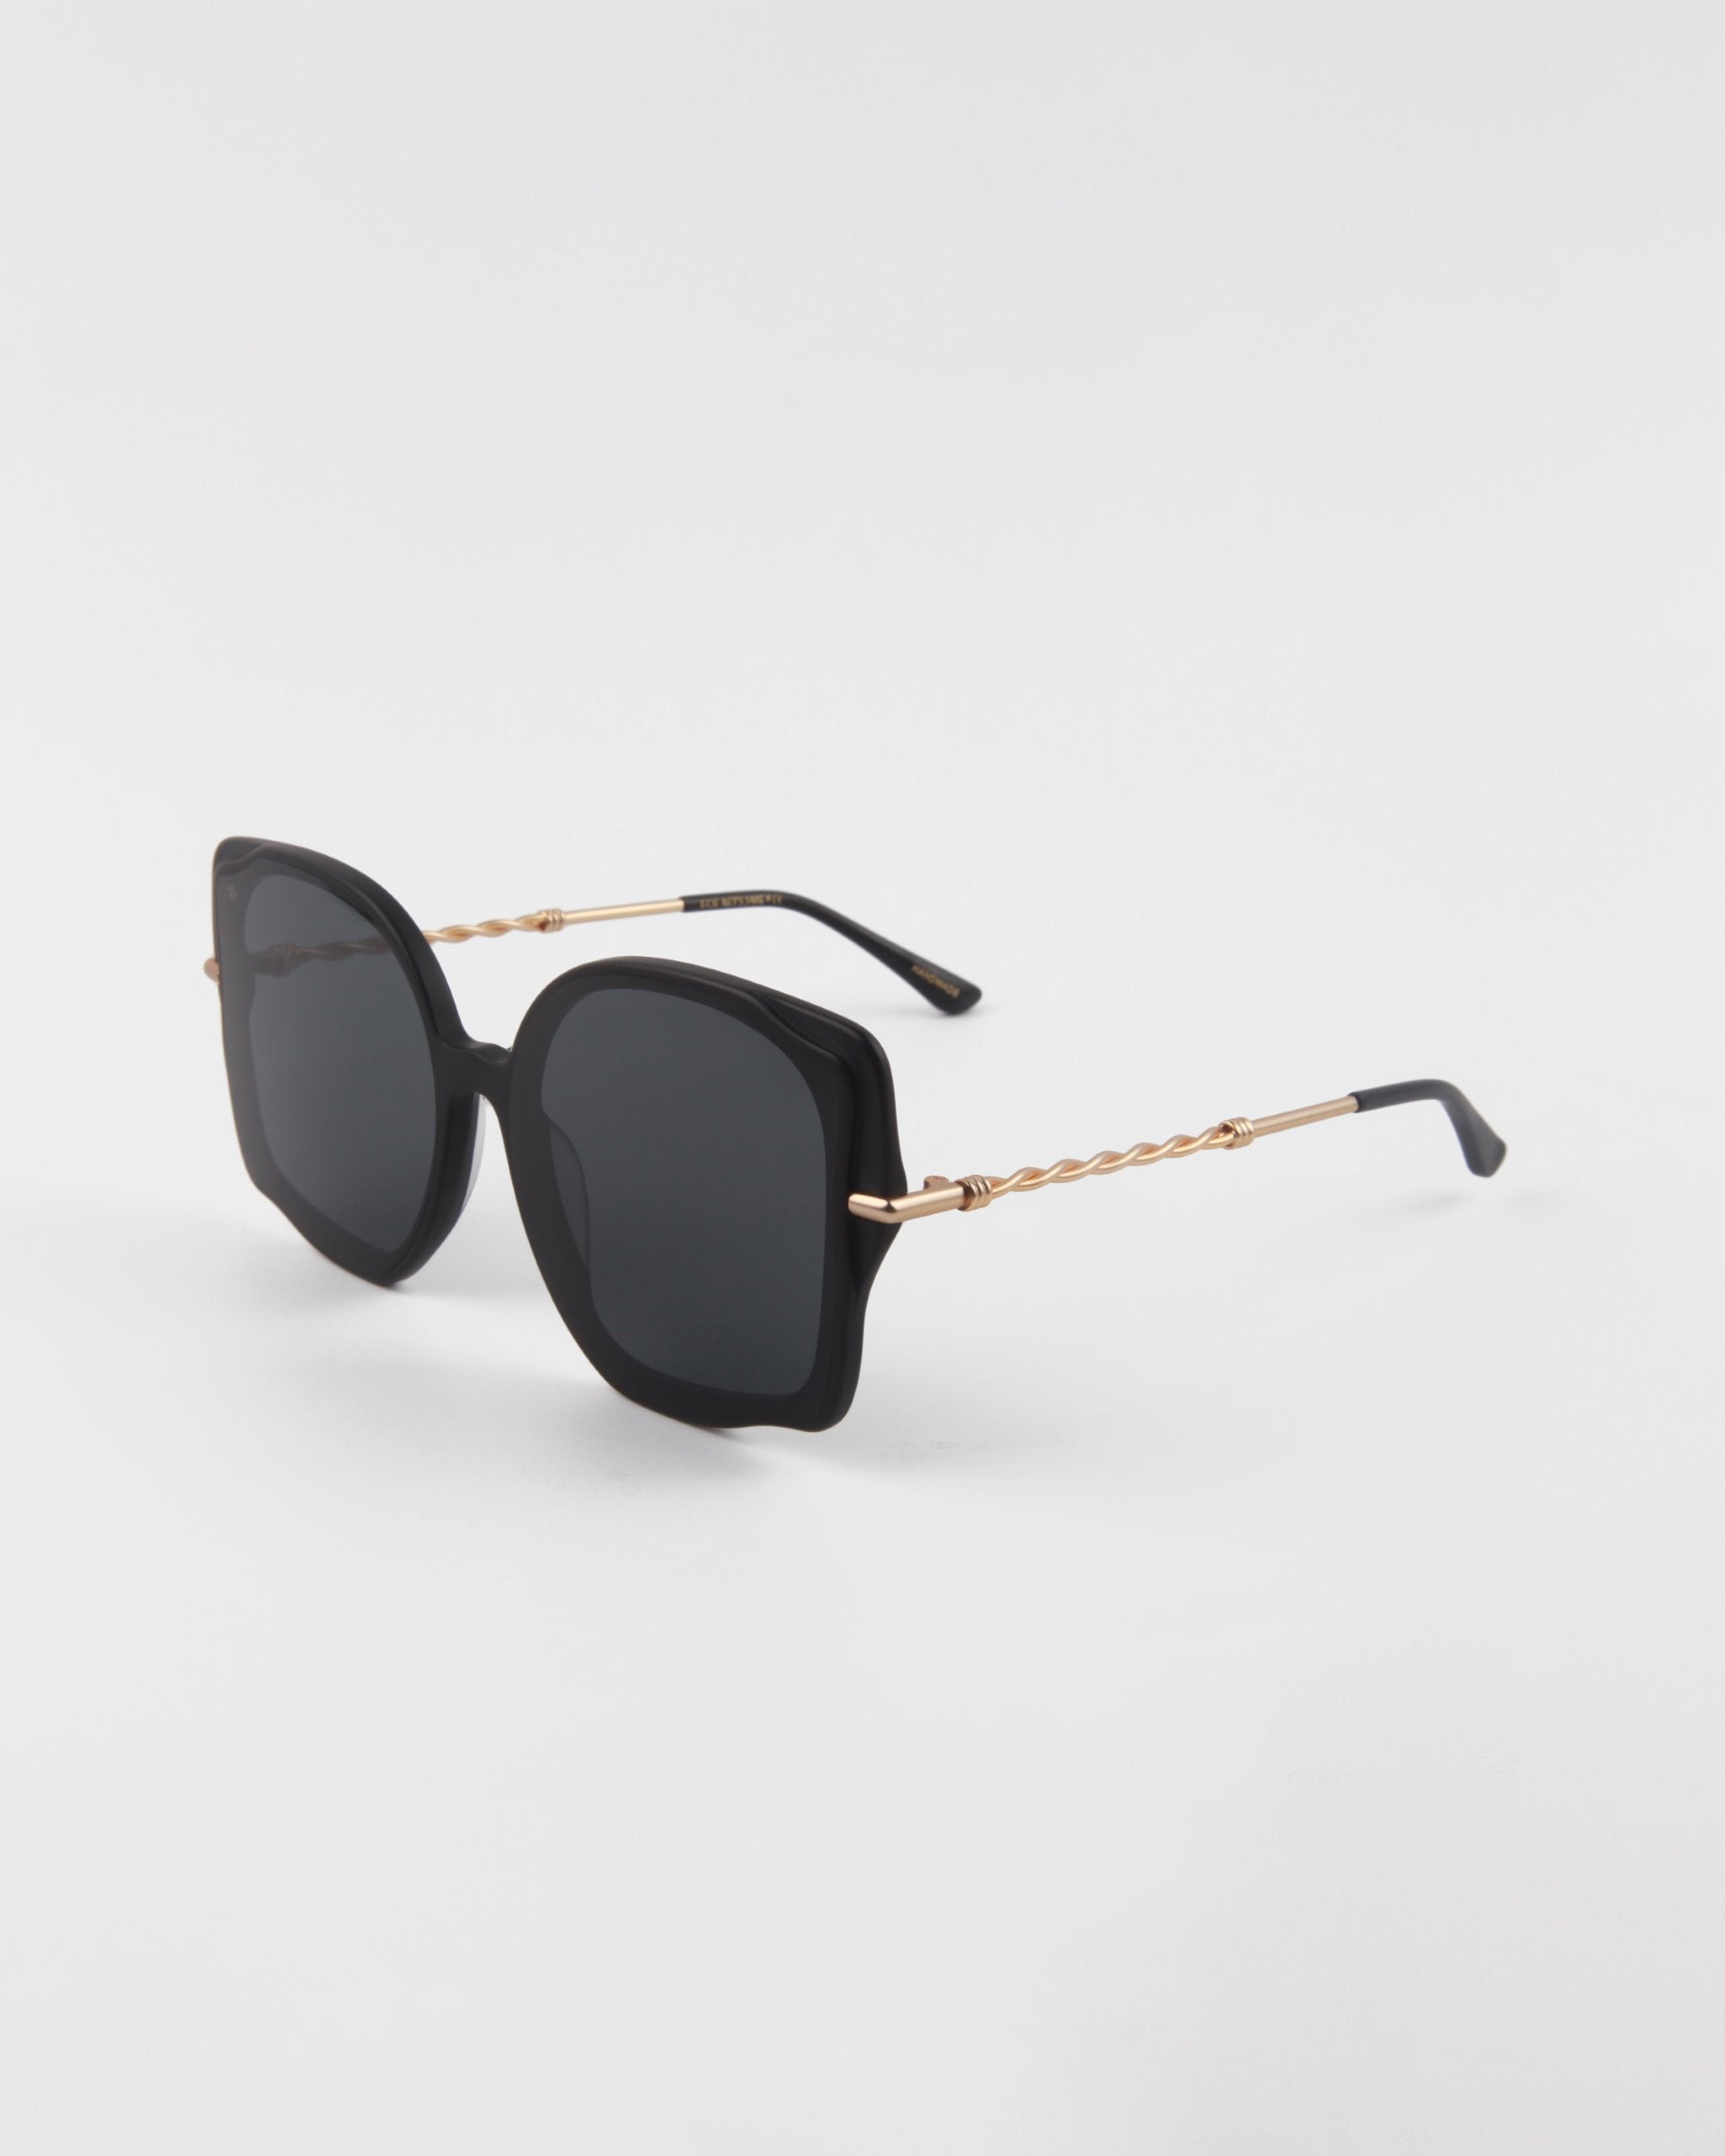 A pair of chic, black square-shaped Fahrenheit handmade acetate sunglasses by For Art's Sake® with dark lenses. The oversized frames have 18-karat gold-plated arms featuring a twisted design near the hinges. The sunglasses rest on a white surface with a gentle shadow.